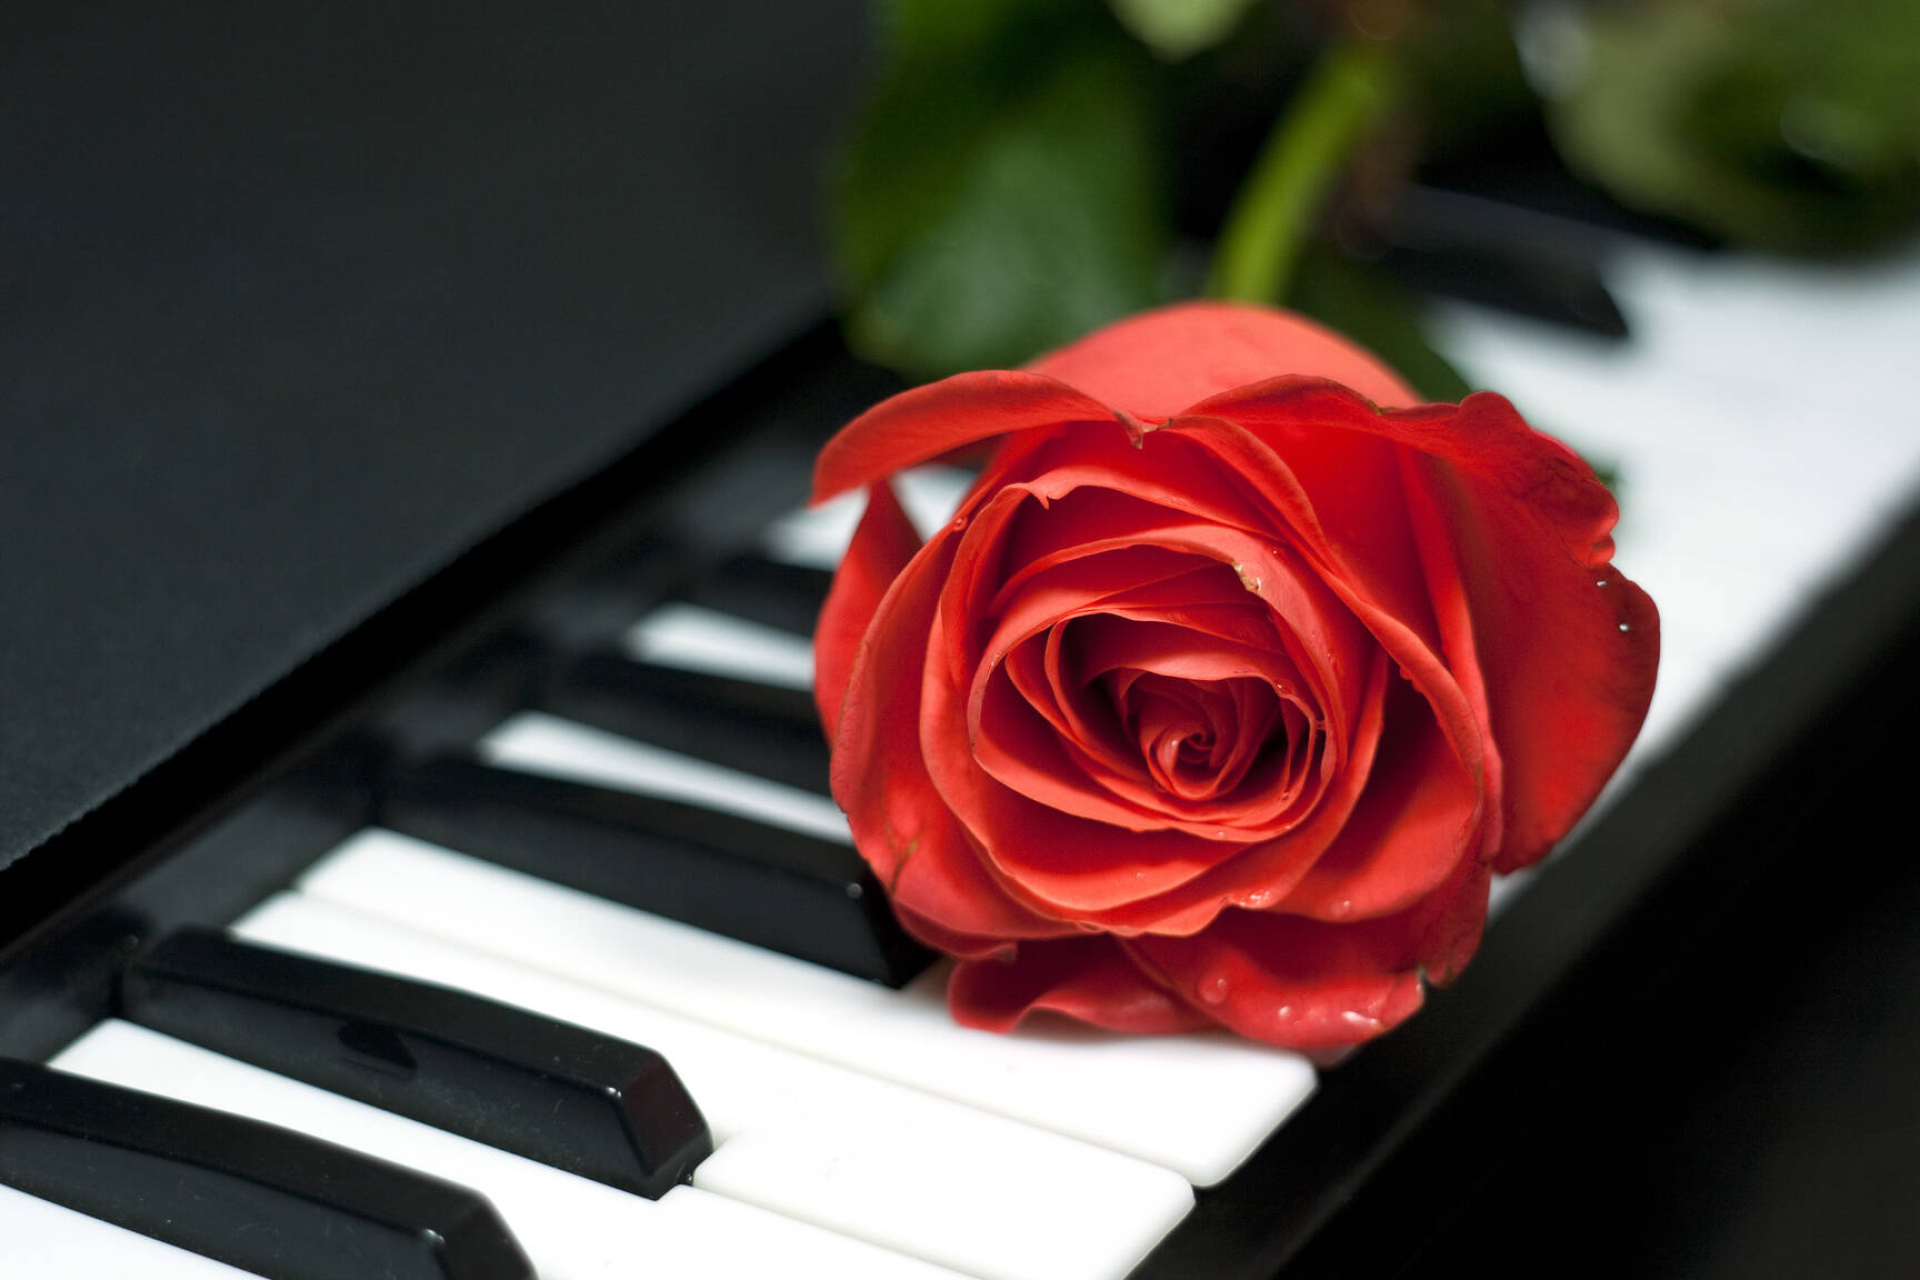 Fortepiano: Tea Rose On Keys, Classical Music, White And Black Keys. 1920x1280 HD Background.